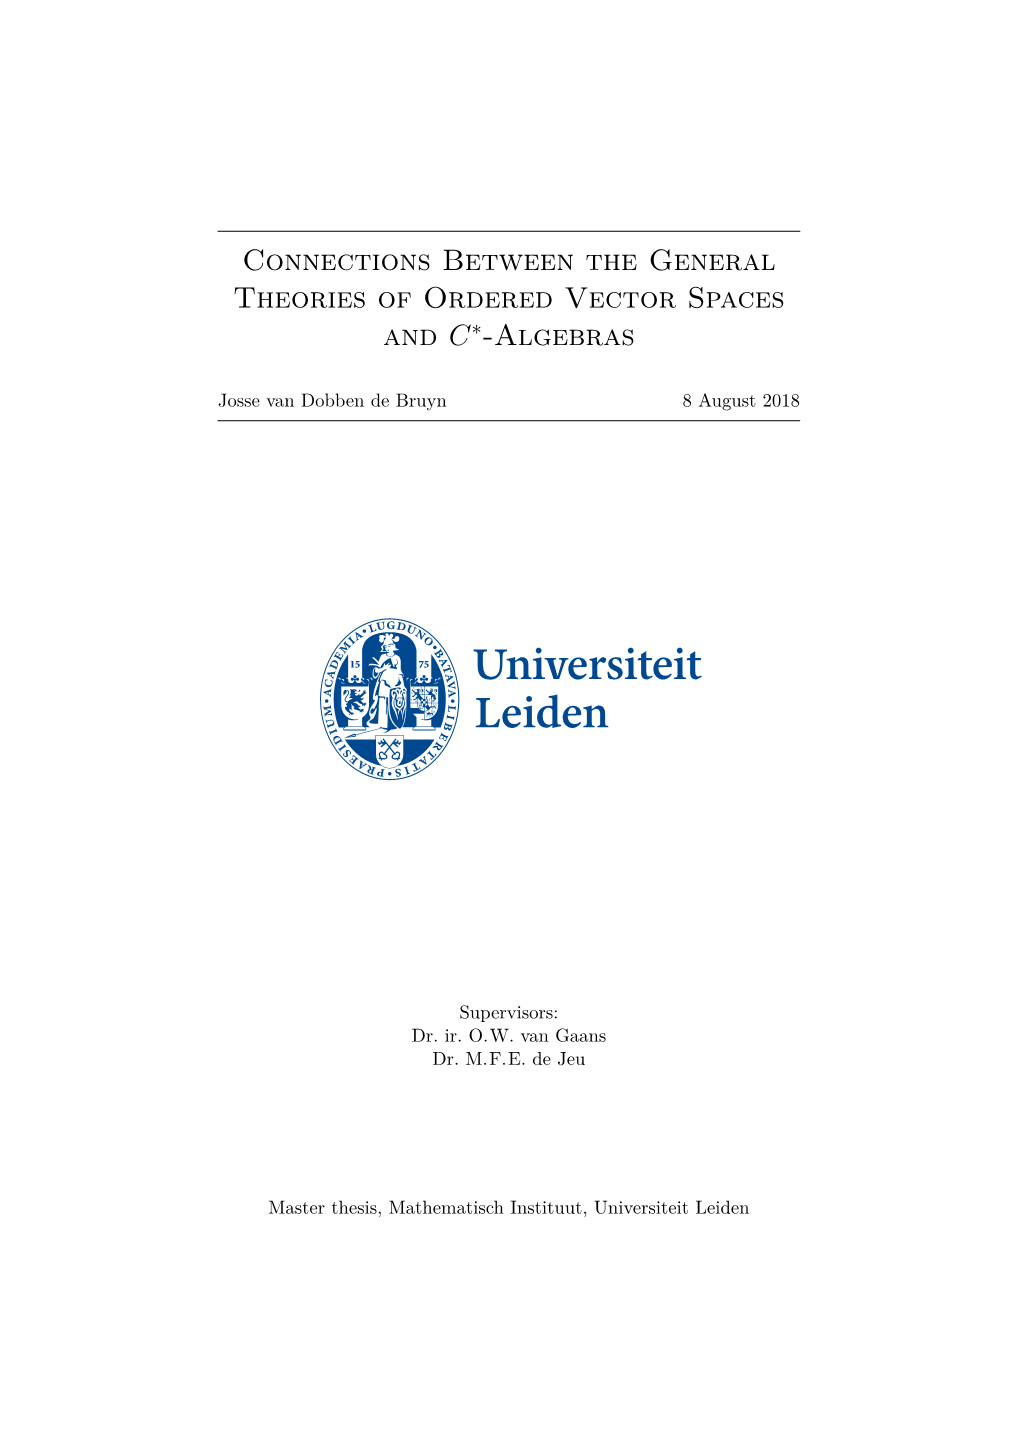 Connections Between the General Theories of Ordered Vector Spaces and C*-Algebras